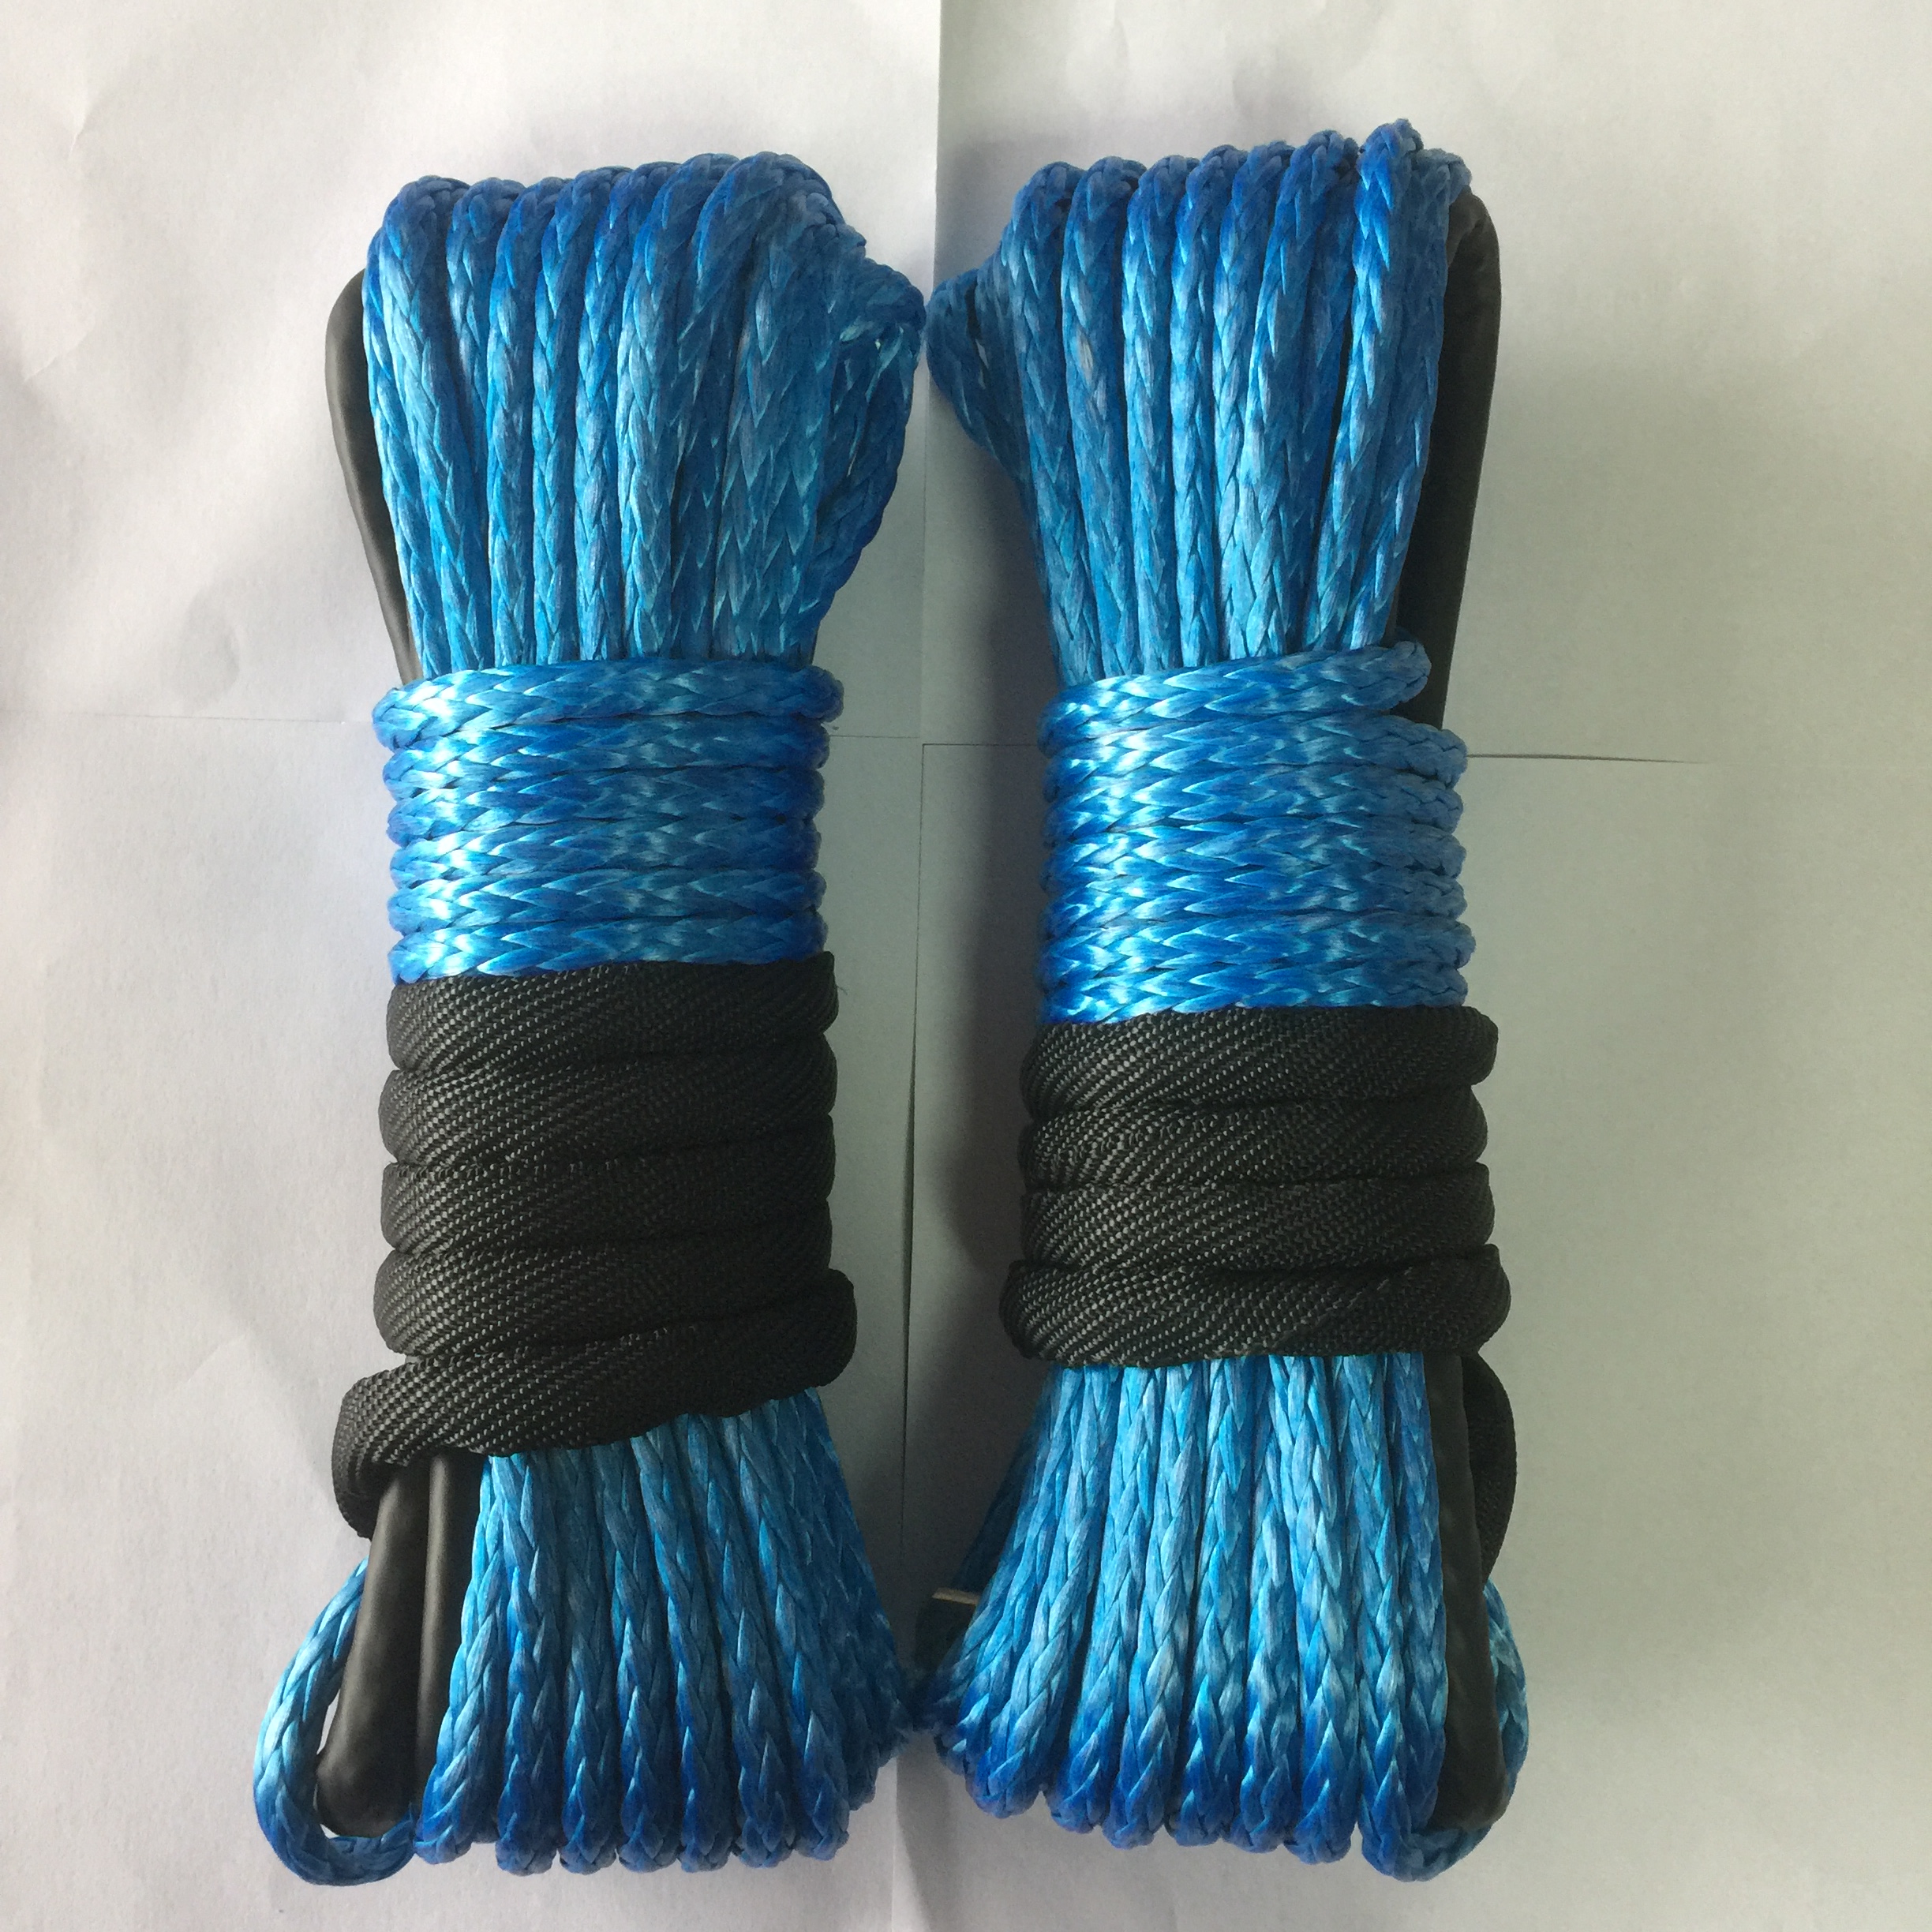 6mm x 50ft synthetic uhmwpe winch rope shipping